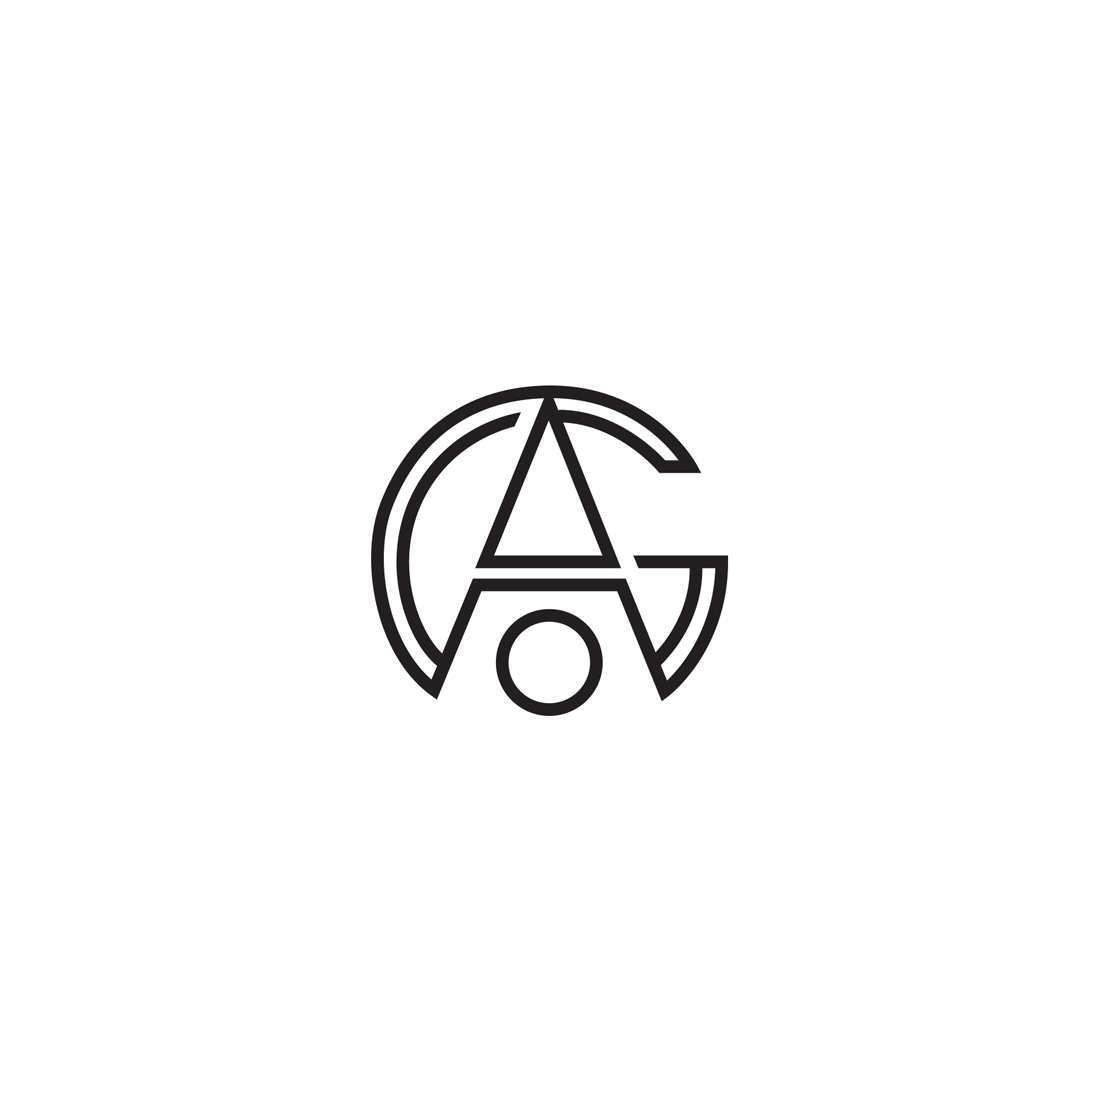 Black and white logo with the letter a.